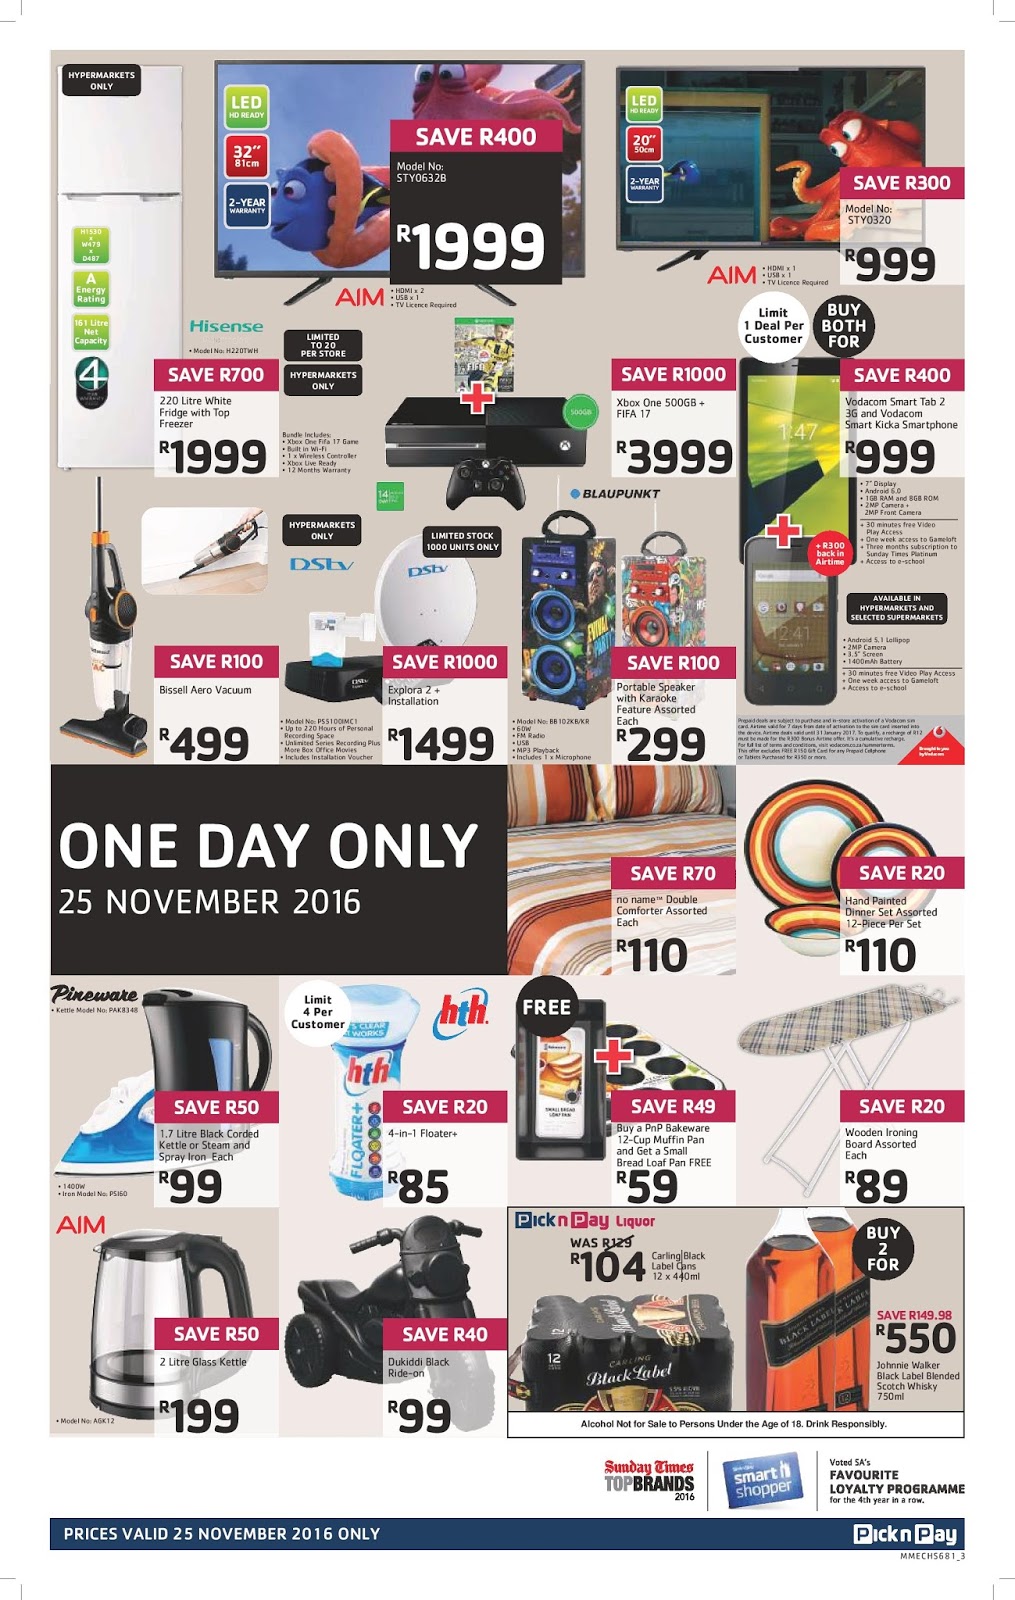 #BlackFriday Pick n Pay Top Best Black Friday Hot deals in South Africa - When Does Southwest Have Black Friday Deals